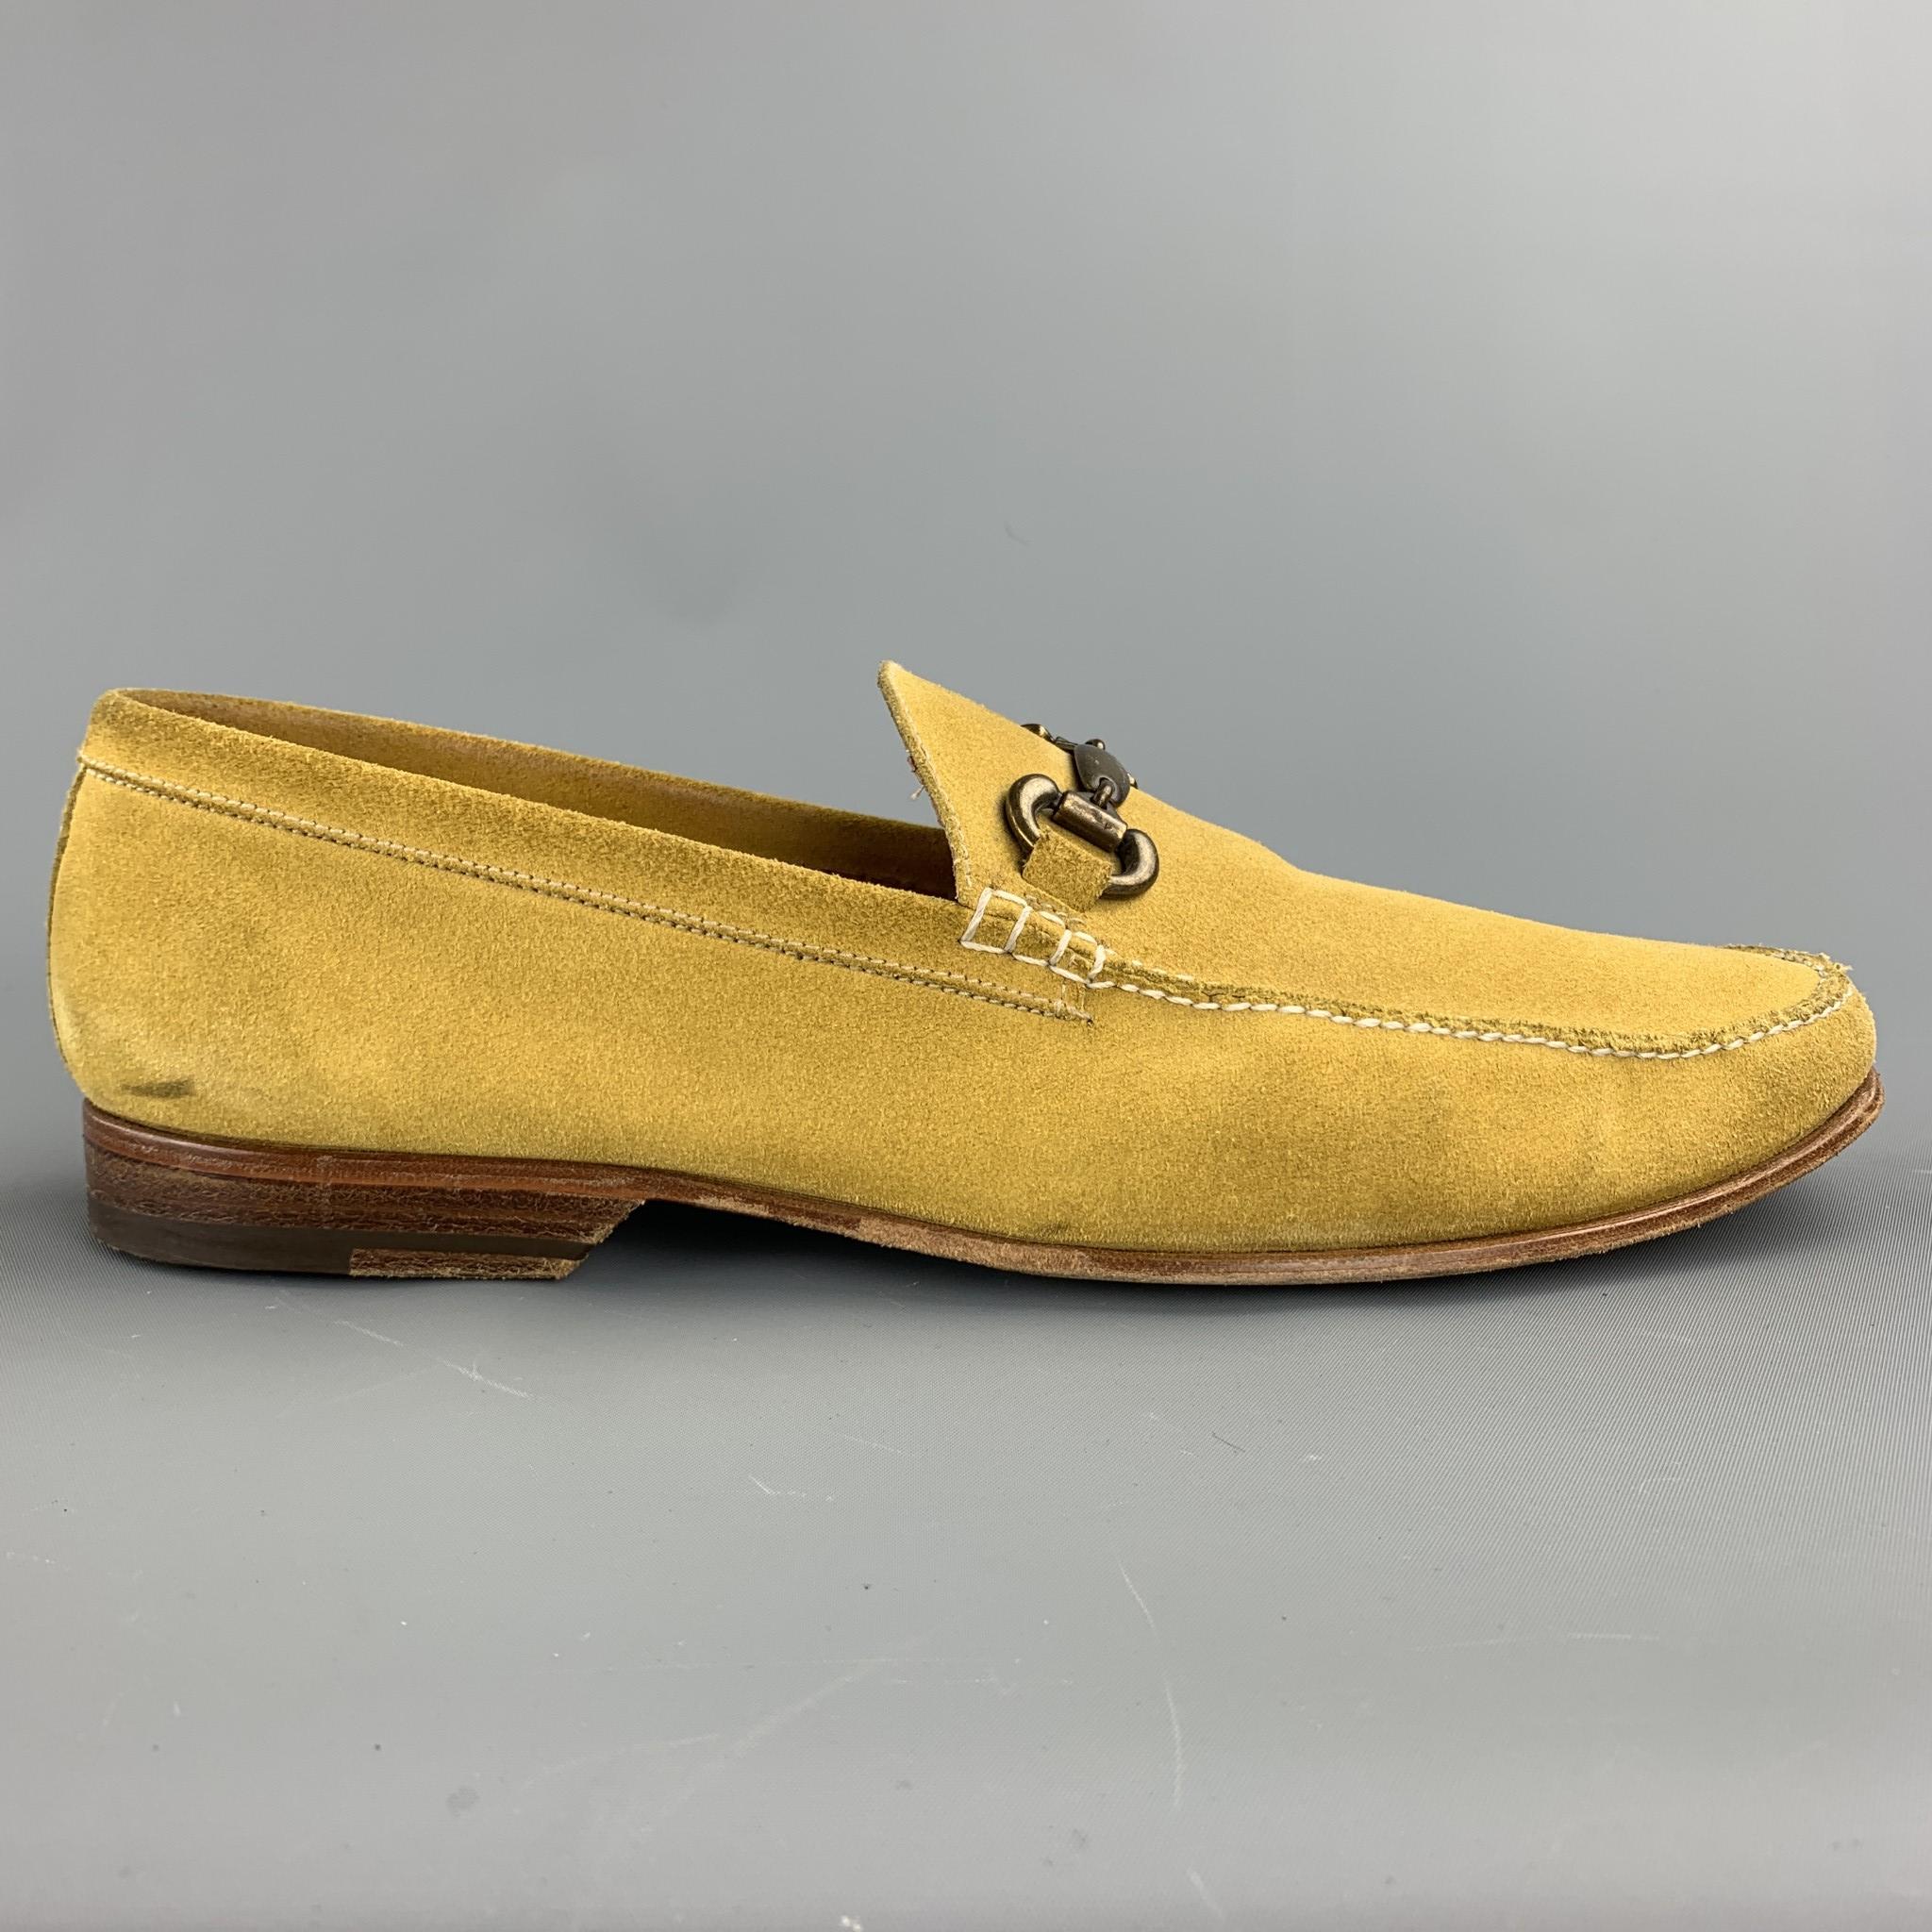 BARRETT loafers comes in a yellow suede featuring a horsebit detail, contrast stitching, and a wooden heel. Minor wear. As-Is. Made in Italy.

Good Pre-Owned Condition.
Marked: 10

Outsole:  

12 in. x 4 in. 